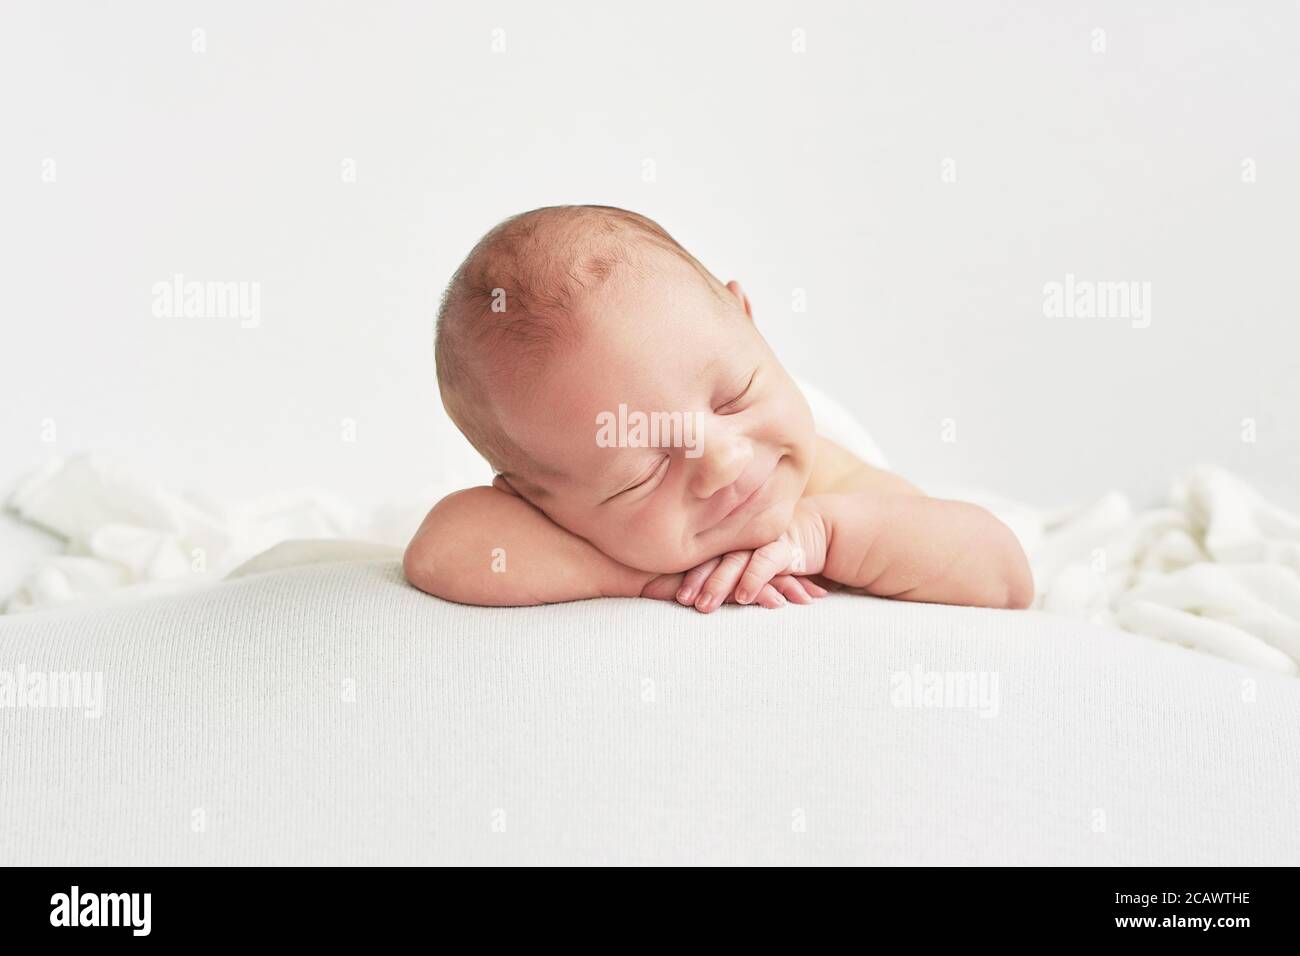 Cute newborn baby lies swaddled in a white blanket. Baby goods packaging template. Closeup portrait of newborn baby with smile on face. Stock Photo